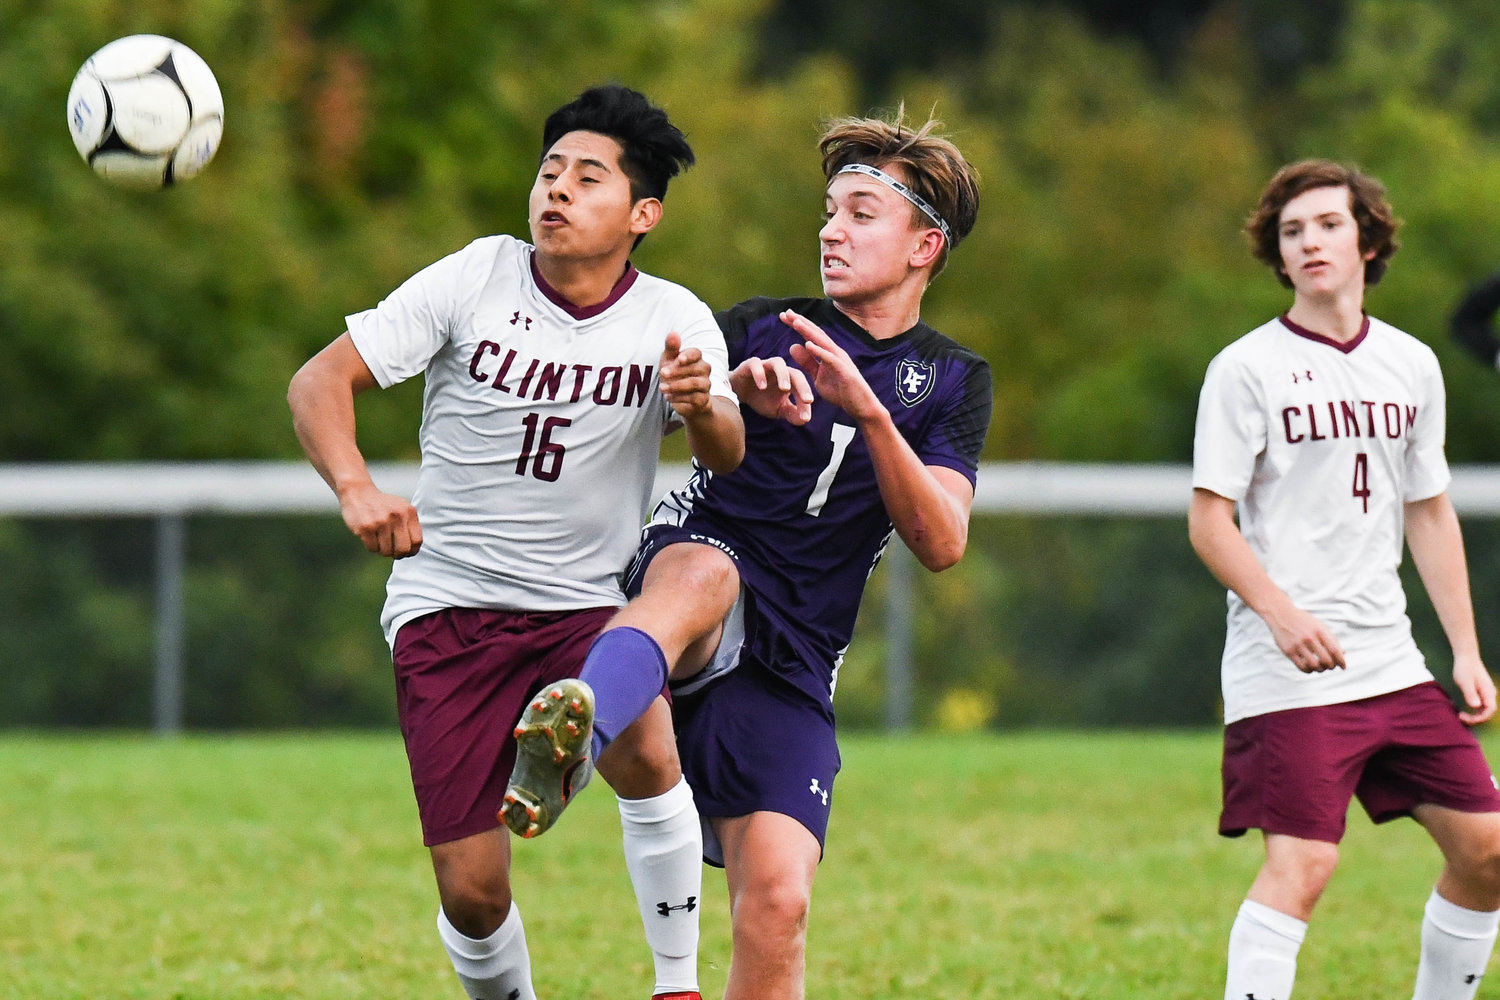 Clinton player Jimi Alvarez (16) fights for control of the ball with Little Falls player Jack Morotti (1) during the game on Tuesday. Morotti scored twice to power the Mounties to a 3-1 win at home.